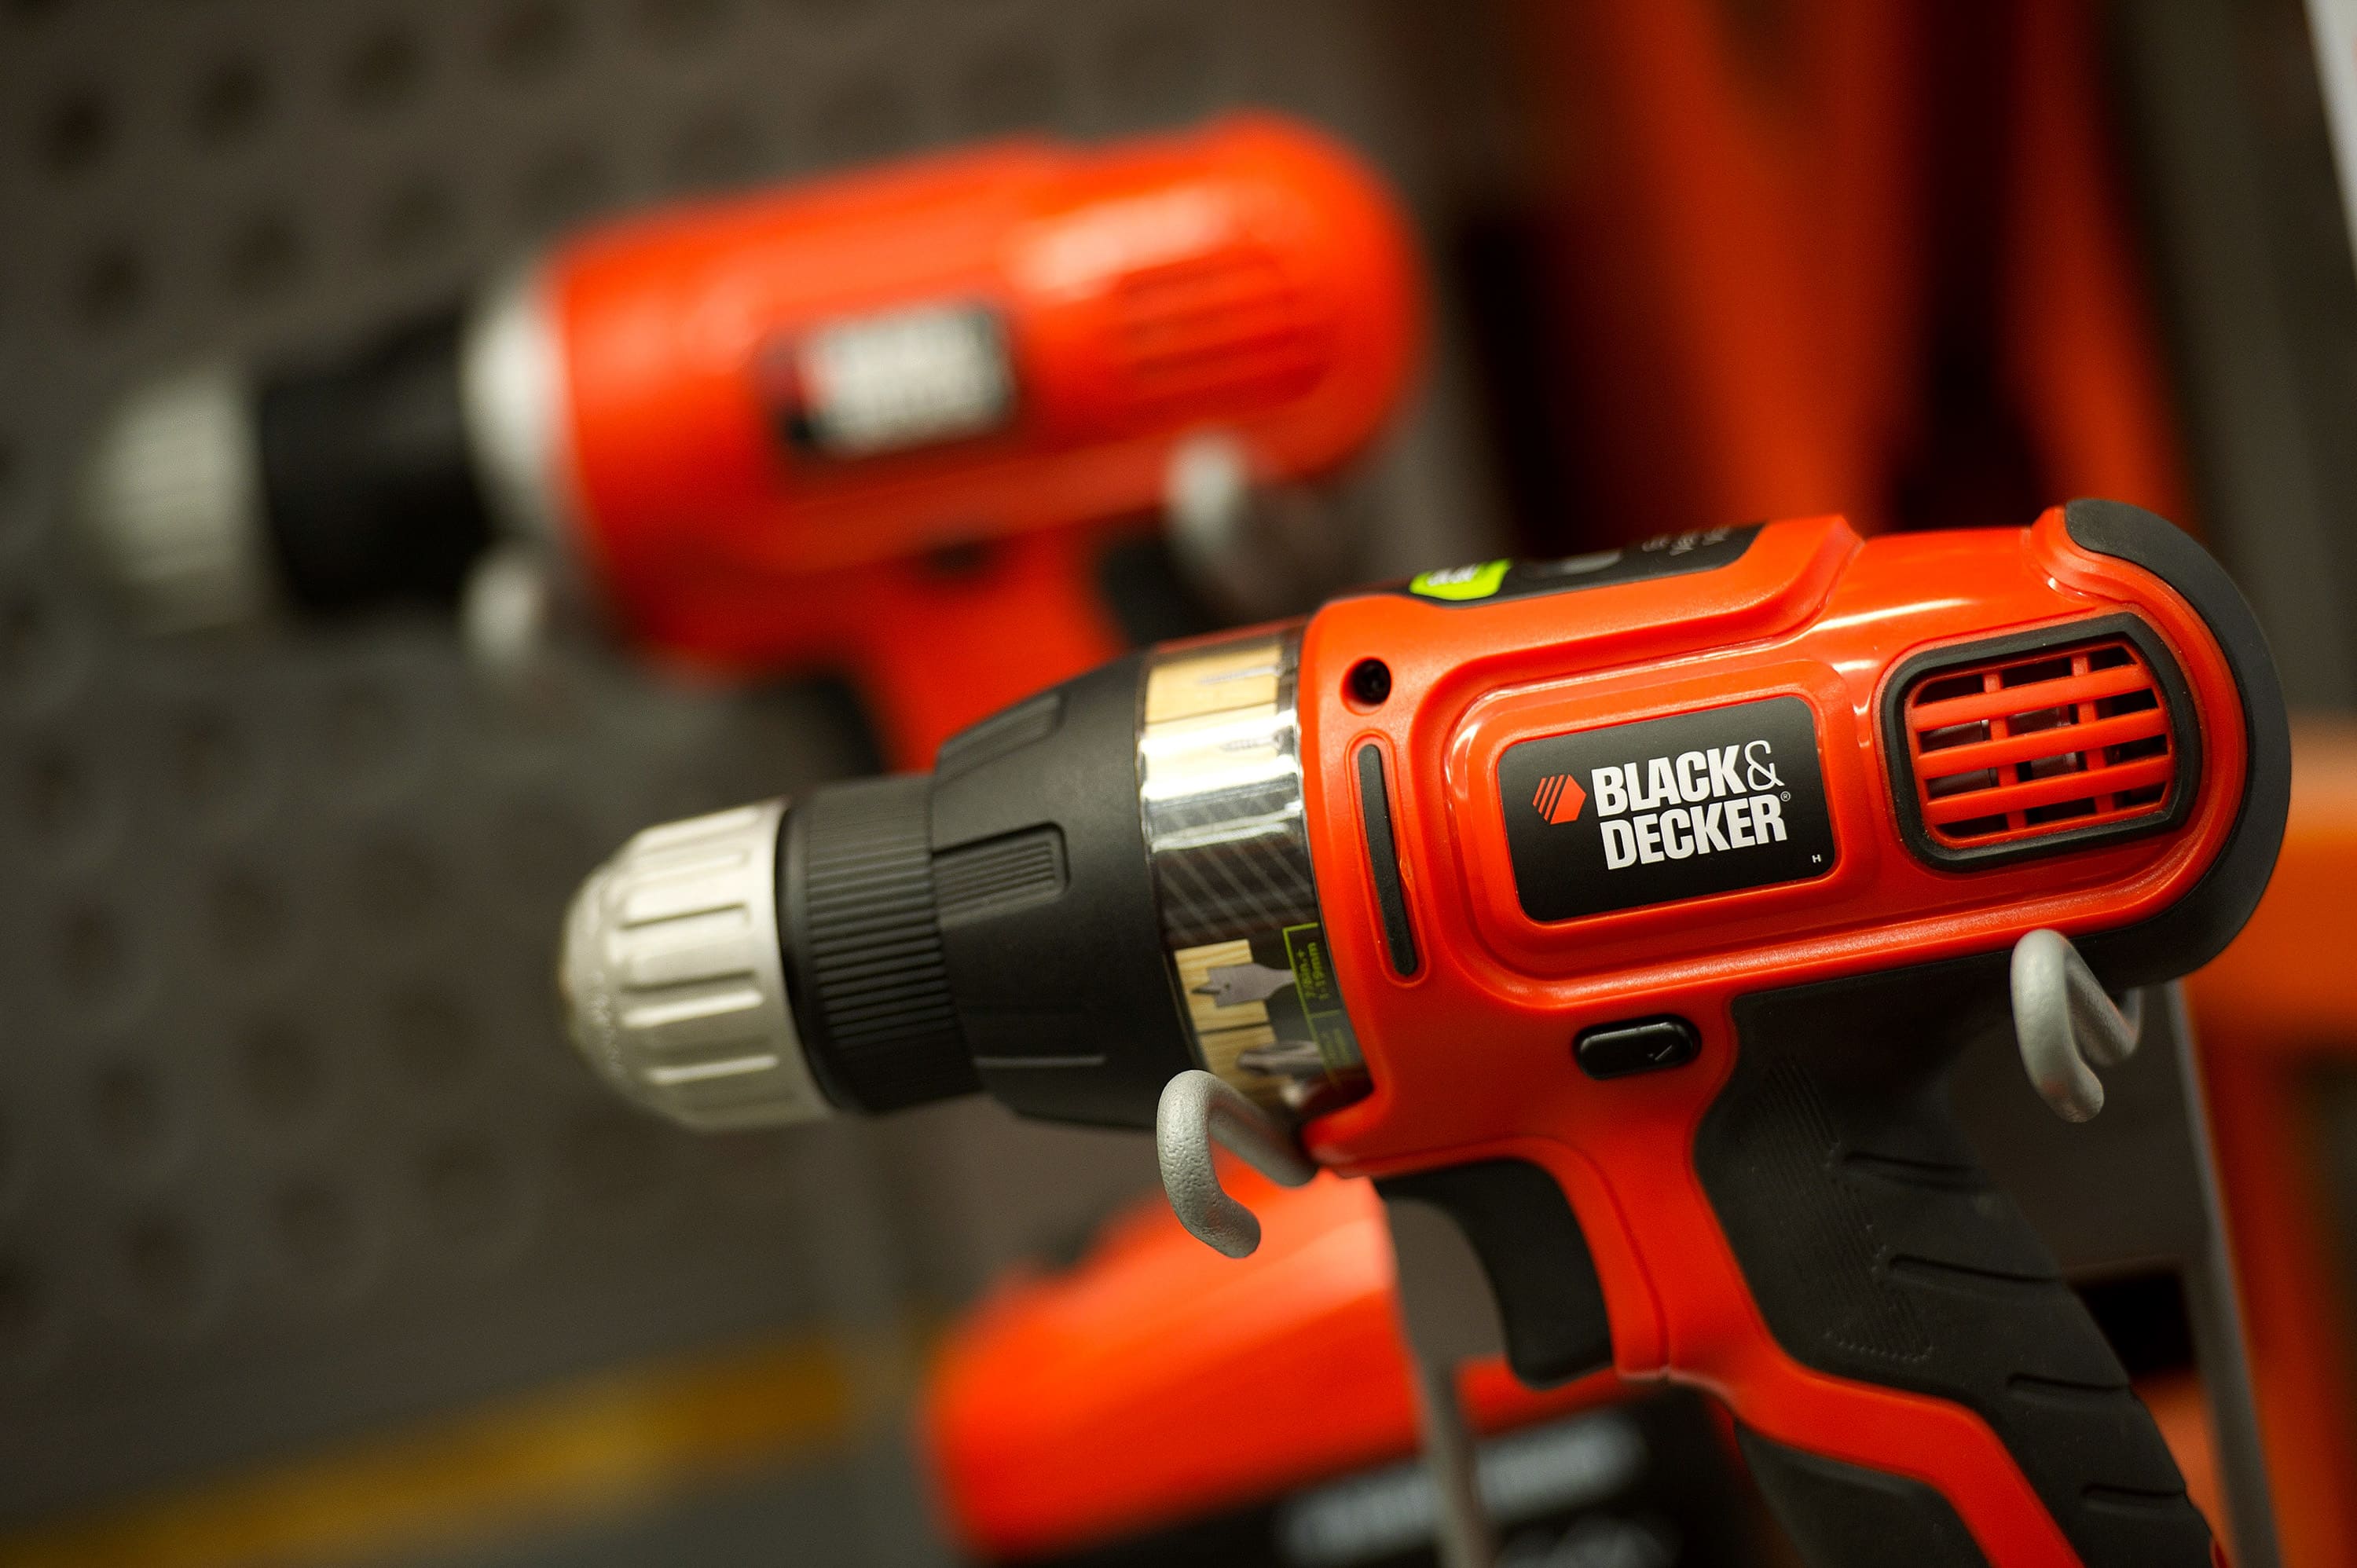 Stanley Black & Decker's turnaround is in full swing, and we're raising our price target 